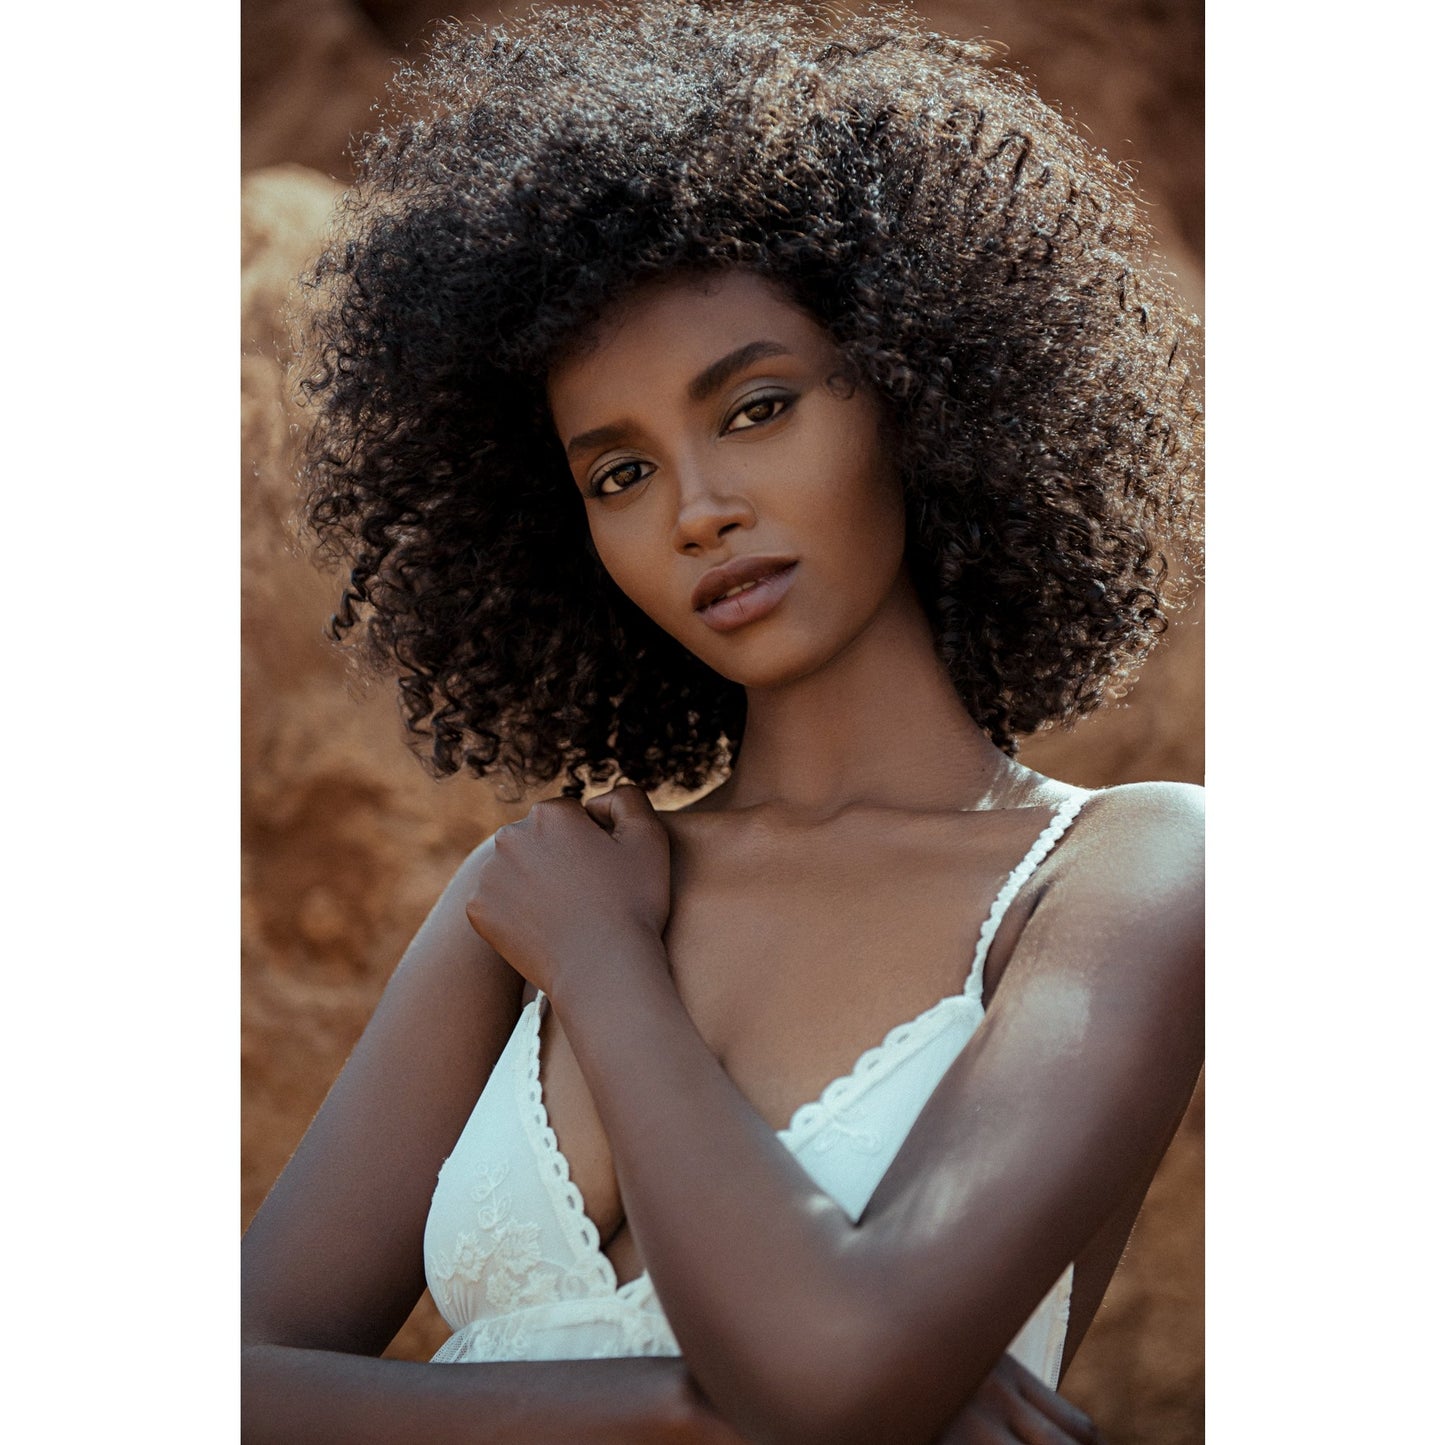 Saphira Divine Conditioner gives Definition & Moisture to Your Curls, with 26 Dead Sea Minerals, African Shea Butter, Black Seed Oil and Natural Essences.